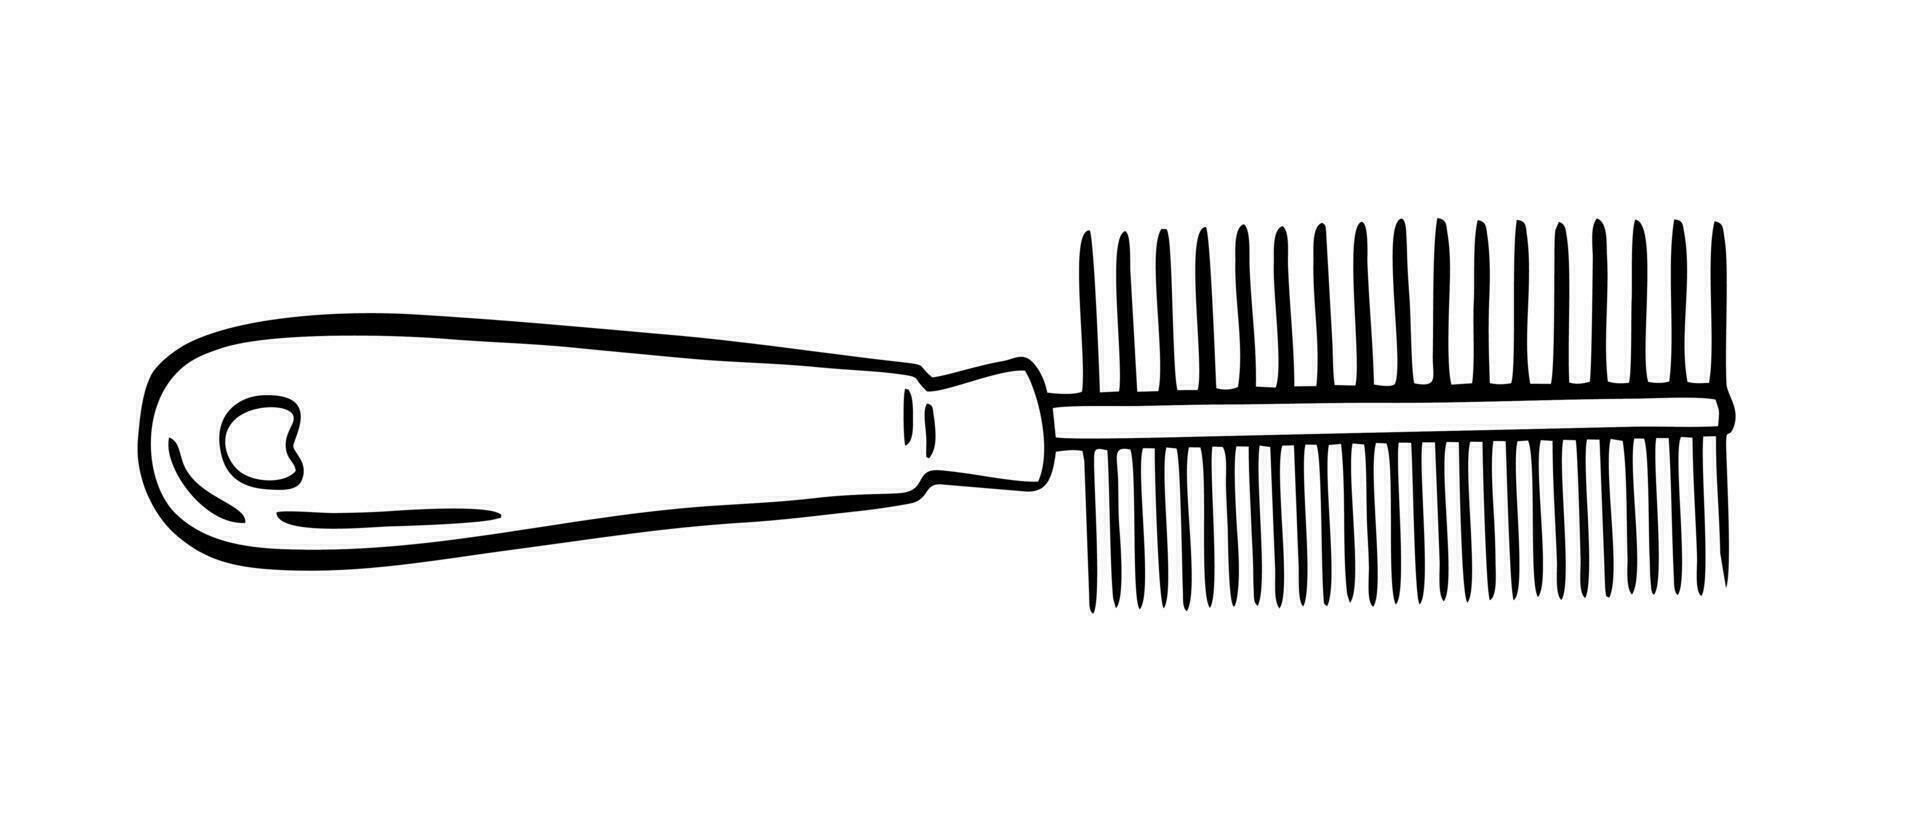 A comb for pets. Pet grooming. Doodle style hand drawn. Vector illustration.